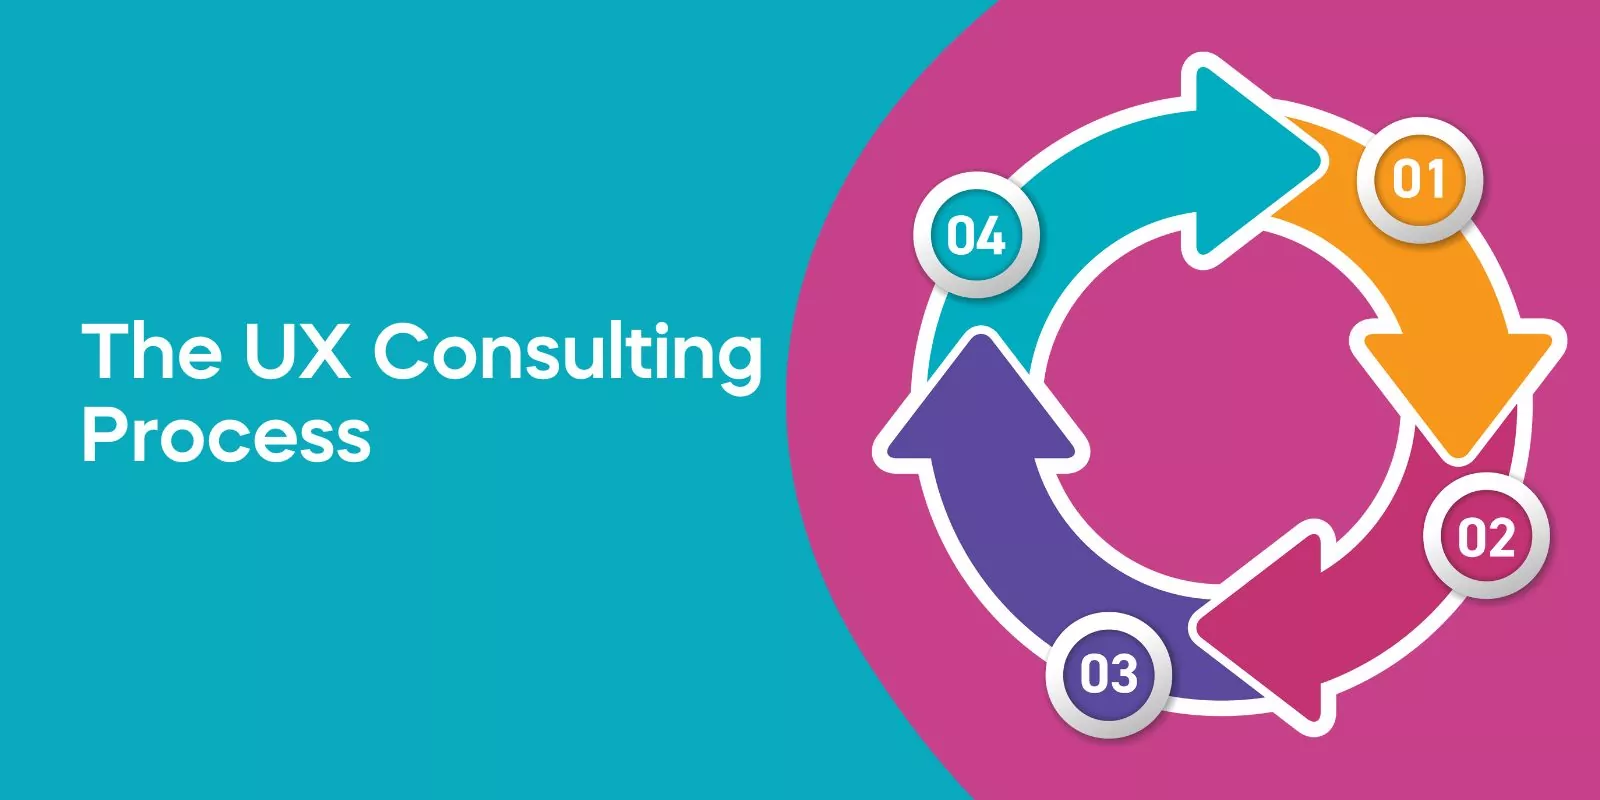 The UX Consulting Process